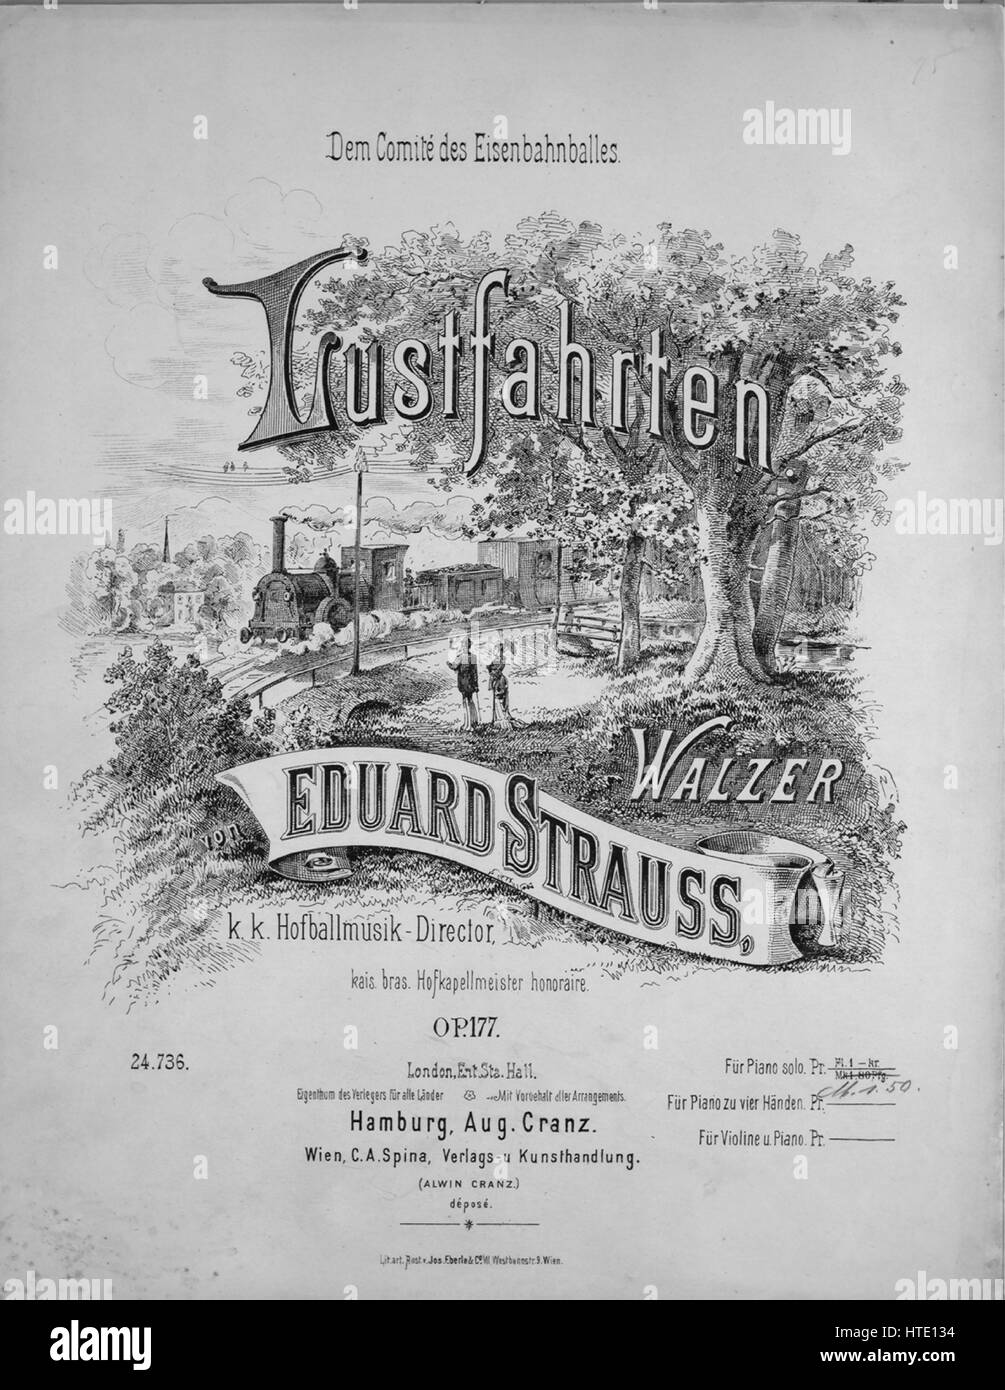 Sheet music cover image of the song 'Lustfahrten Walzer Dem Comite des Eisenbahnballes', with original authorship notes reading 'Eduard Strauss, kk Hofballmusik - Director, kais brasil Hofkapellmeister honoraire', 1900. The publisher is listed as 'Aug. Cranz', the form of composition is 'four sectional waltzes, introduction and coda', the instrumentation is 'piano', the first line reads 'None', and the illustration artist is listed as 'Lit. art. Anst. v. jos. Eberle and Co. VII Westbanstr. 9 Wien'. Stock Photo